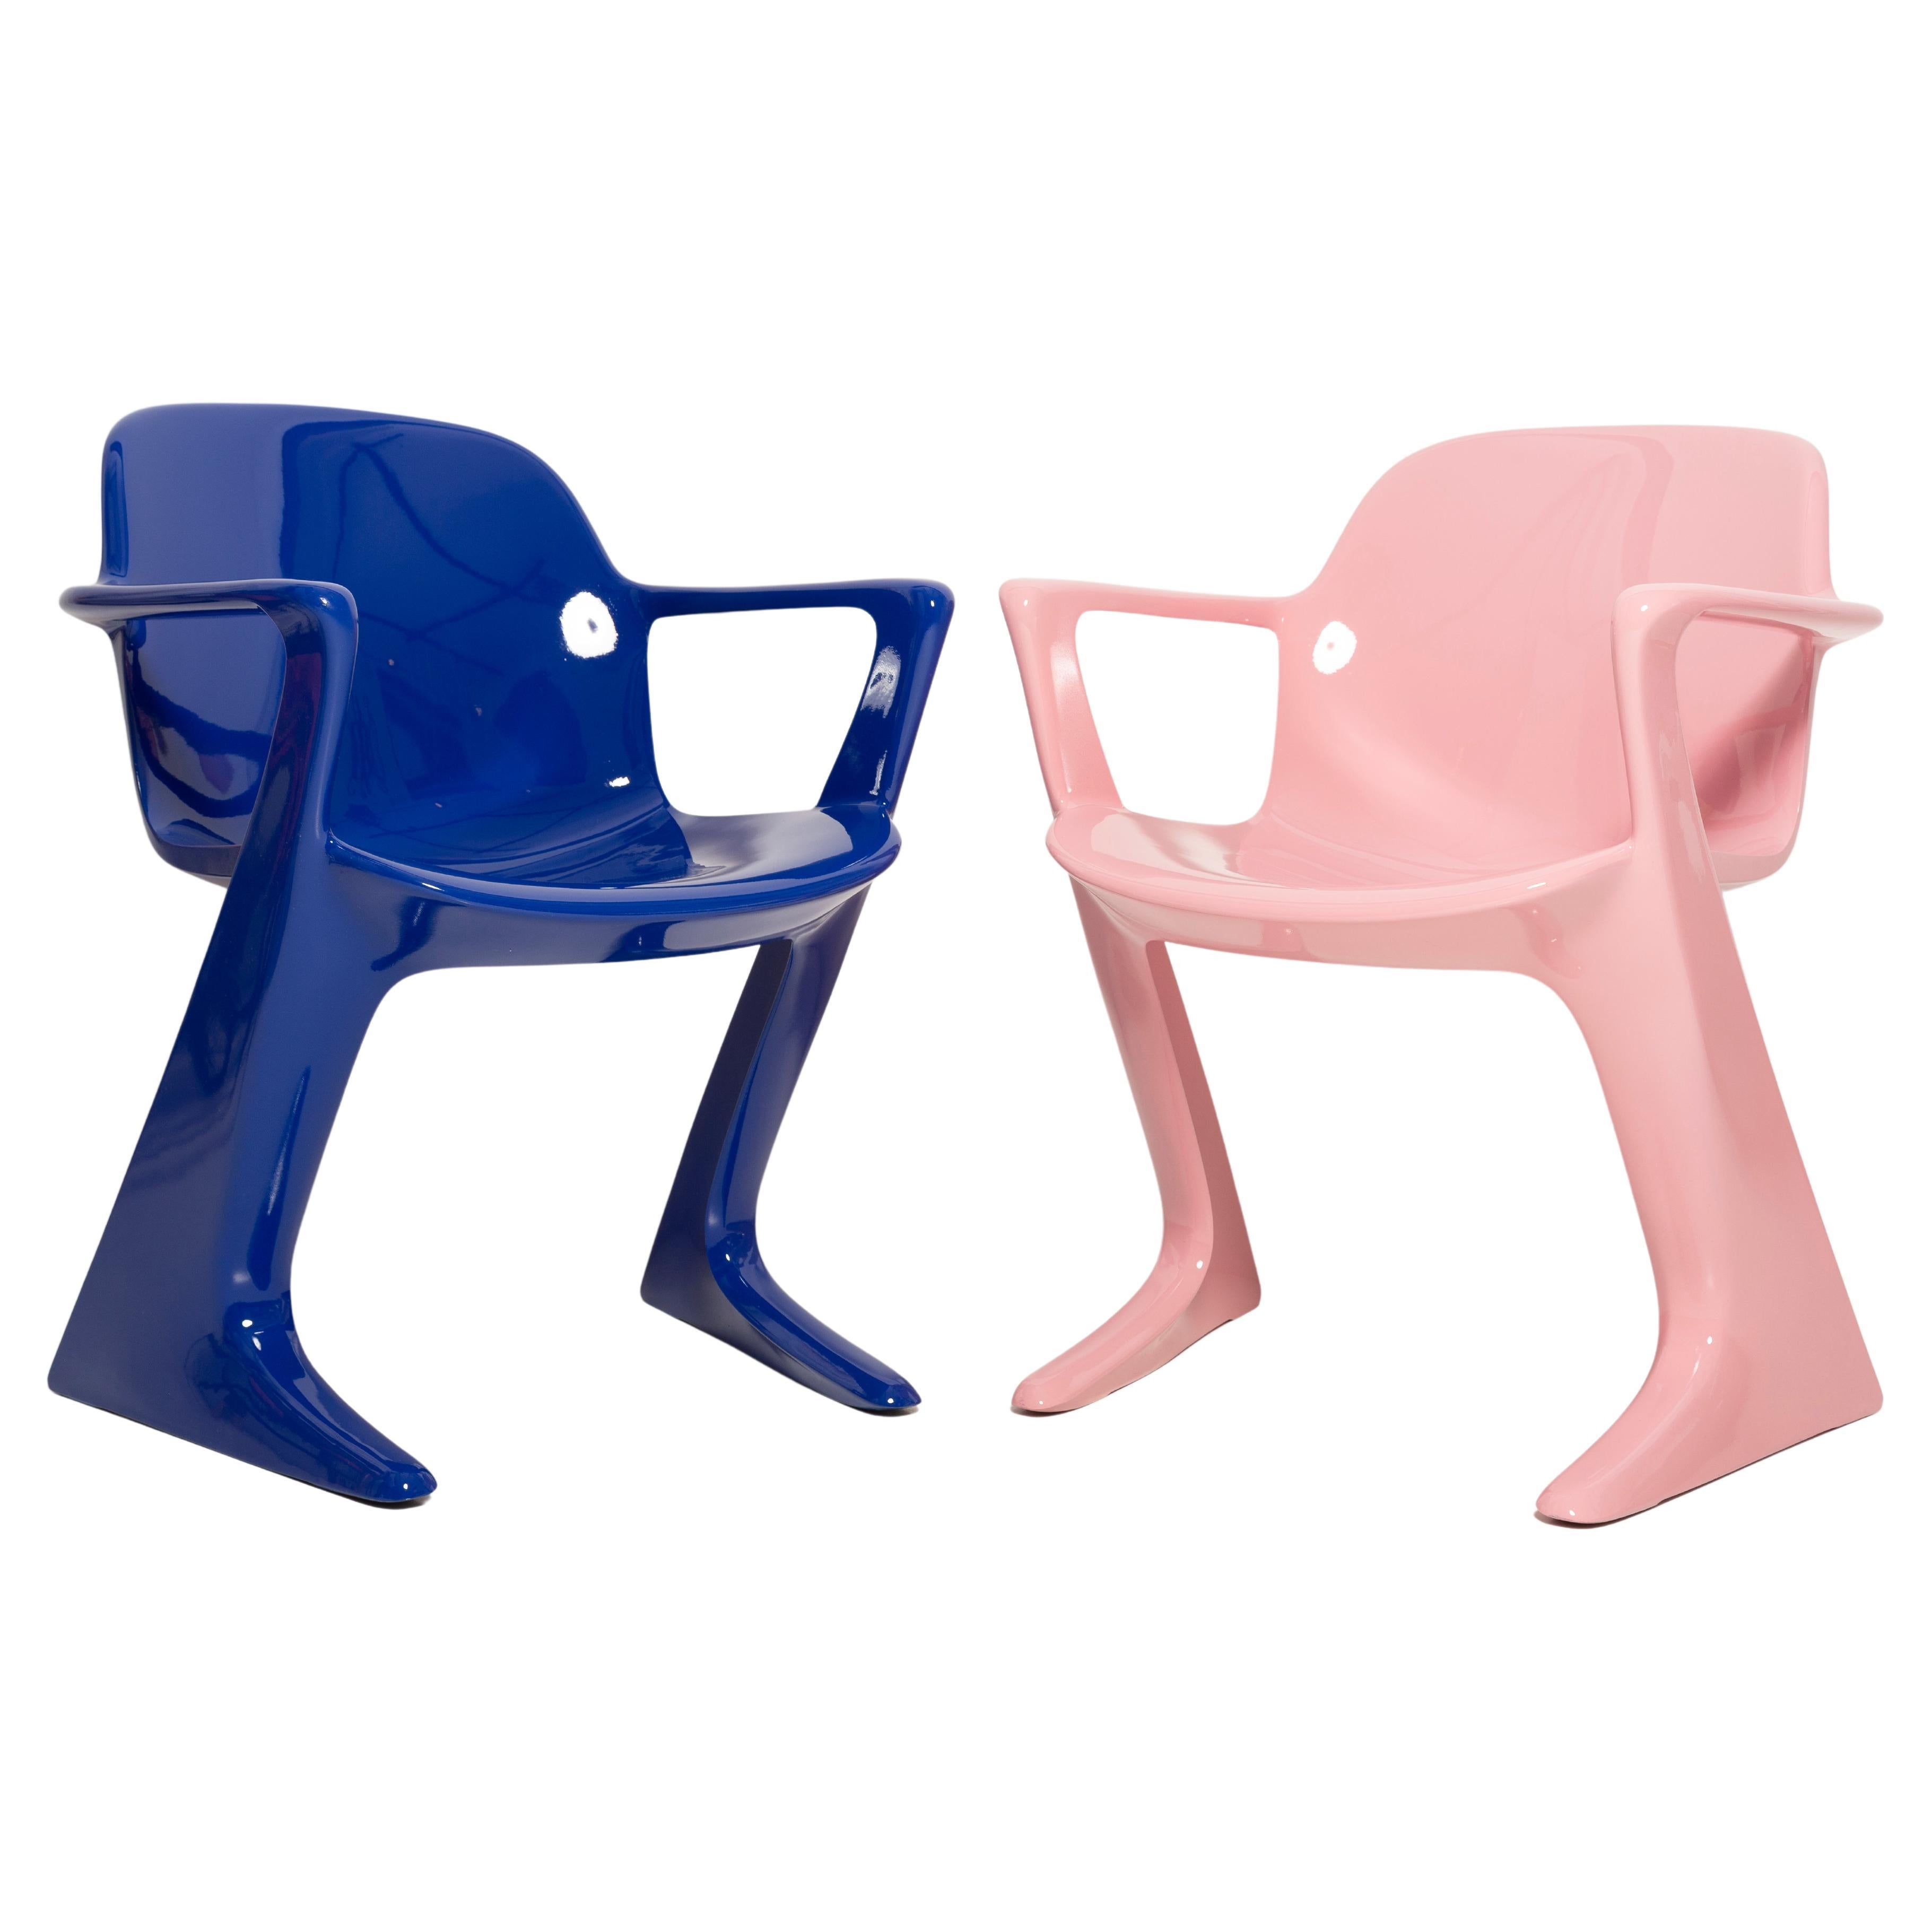 Two Mid-Century Baby Pink and Blue Kangaroo Chairs, Ernst Moeckl, Germany, 1968 For Sale